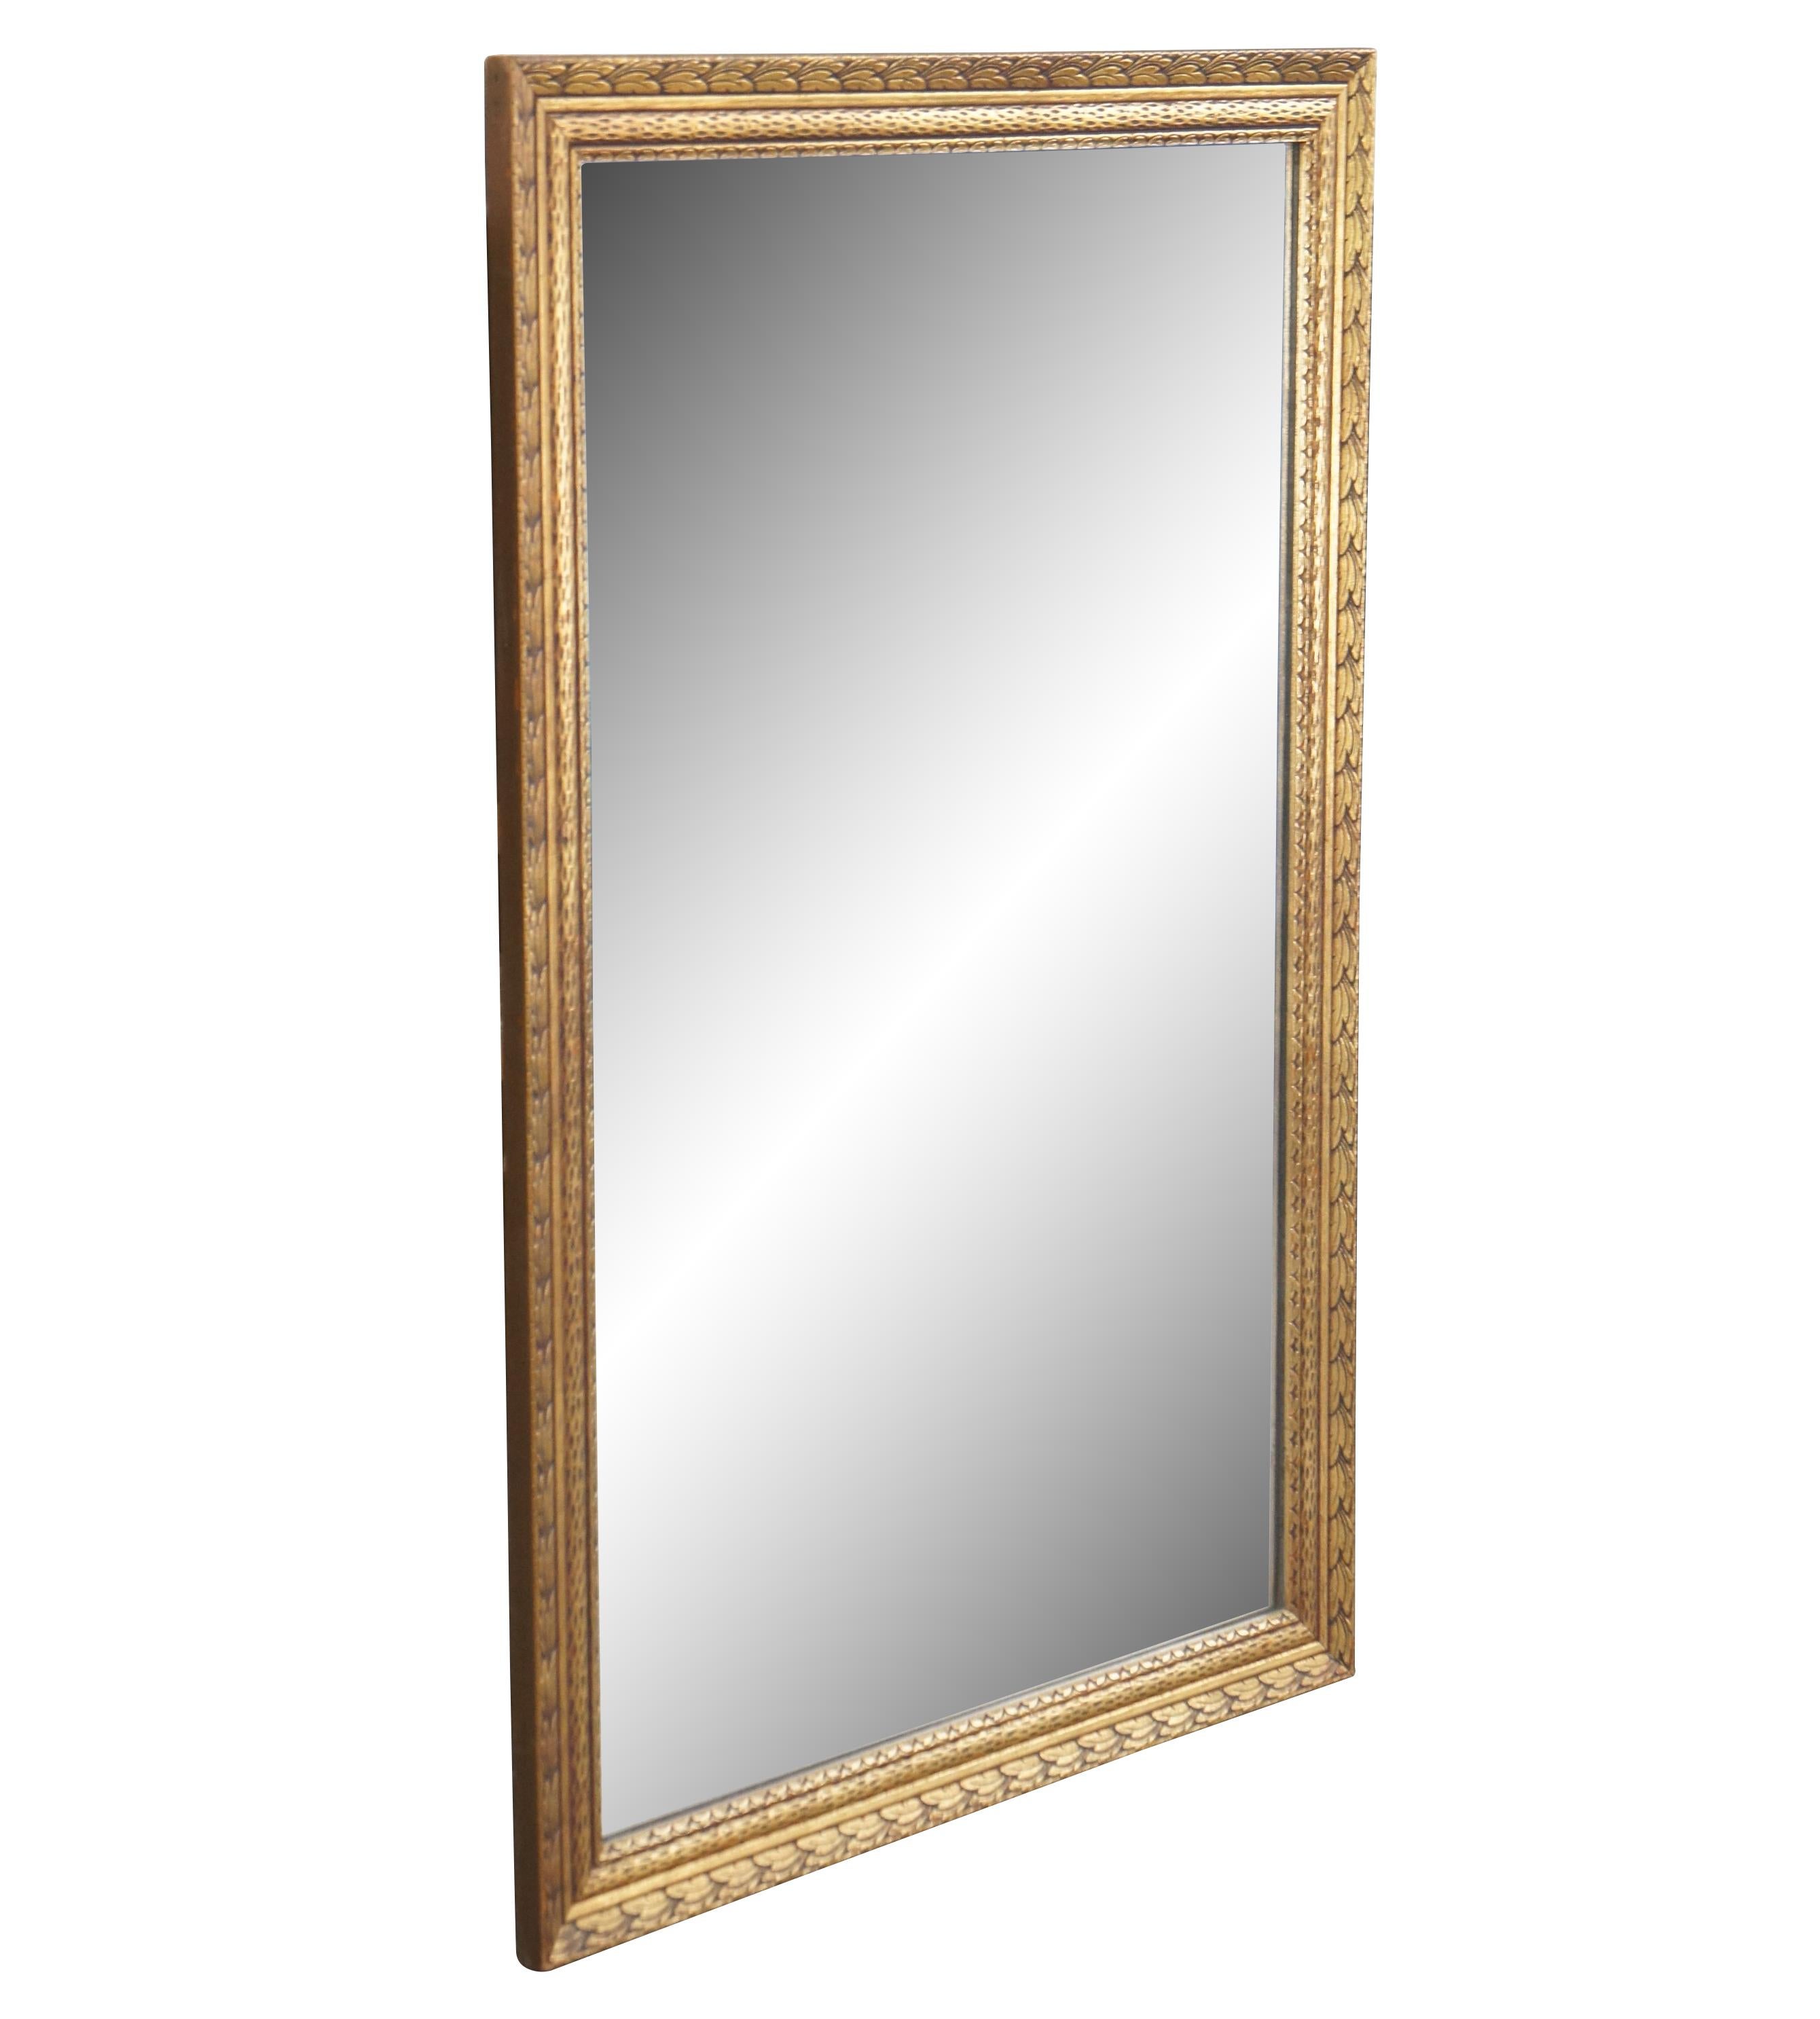 Vintage Hollywood Regency gold over mantel vanity mirror featuring rectangular form with carved accents.

